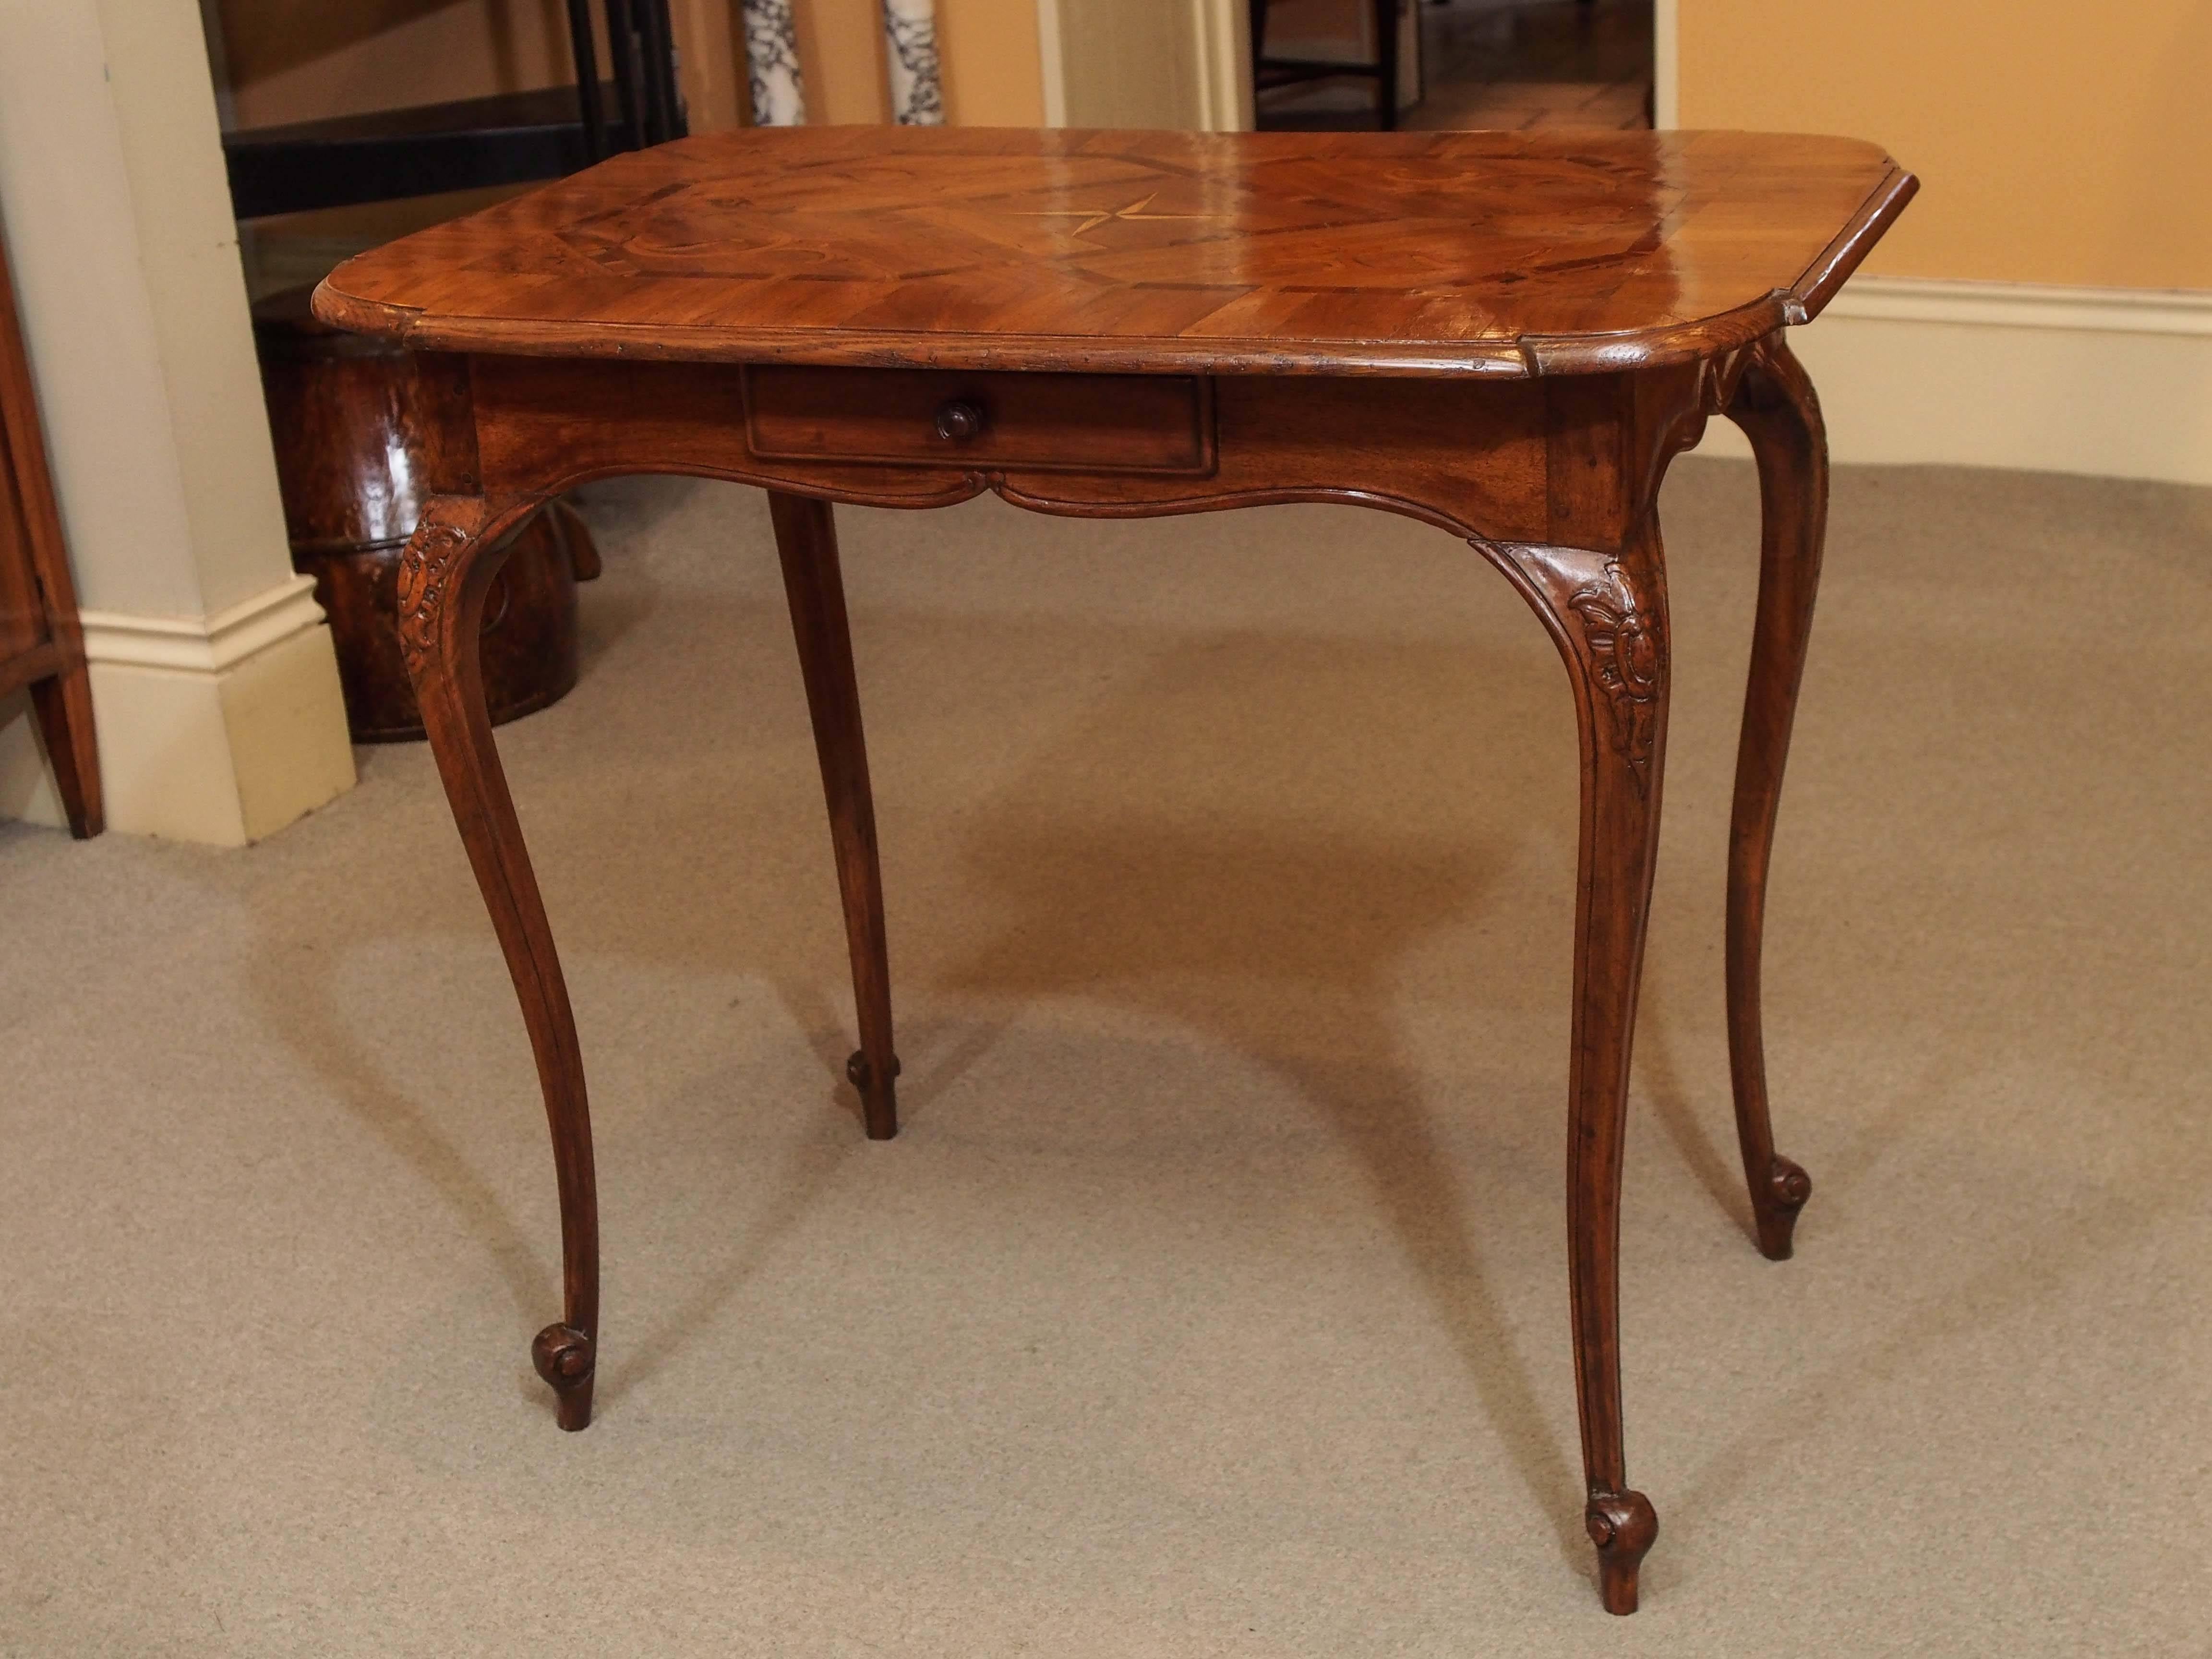 Antique French inlaid tea table. Mahogany and mixed woods.